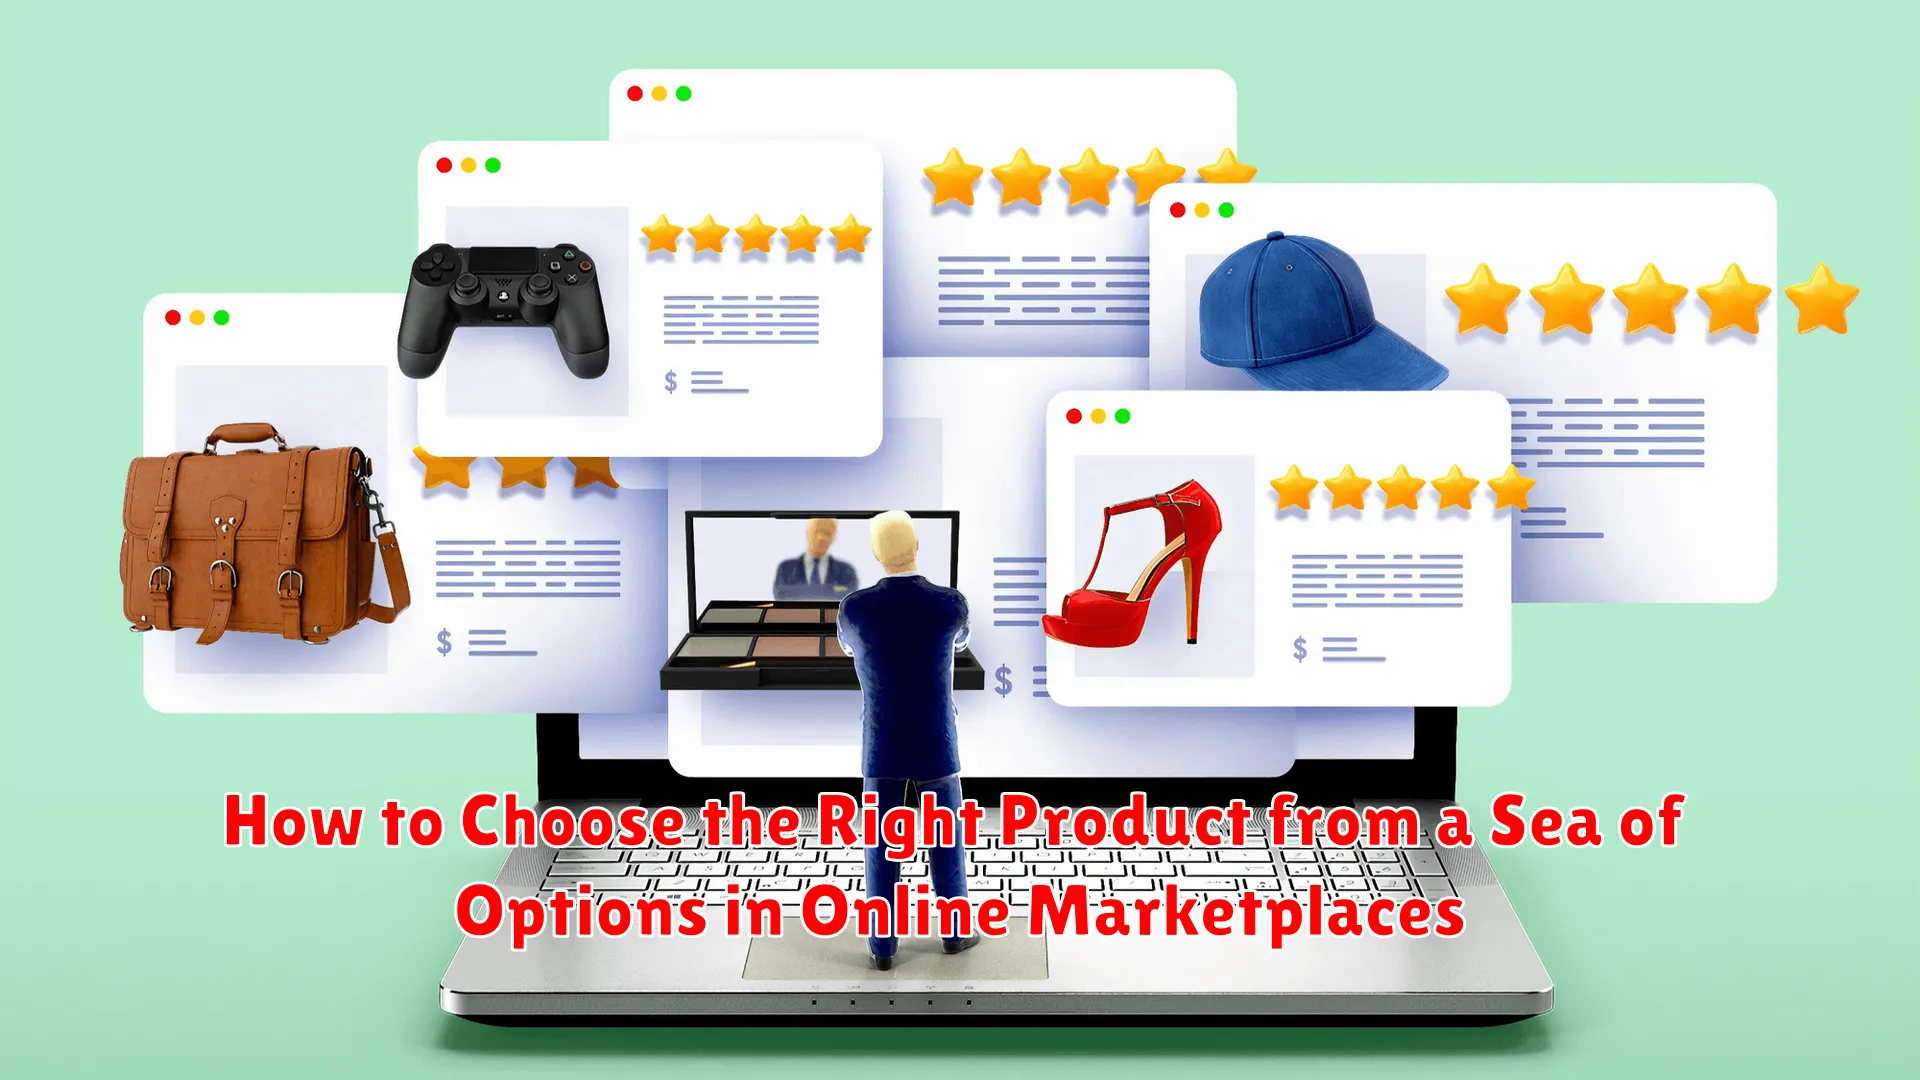 How to Choose the Right Product from a Sea of Options in Online Marketplaces